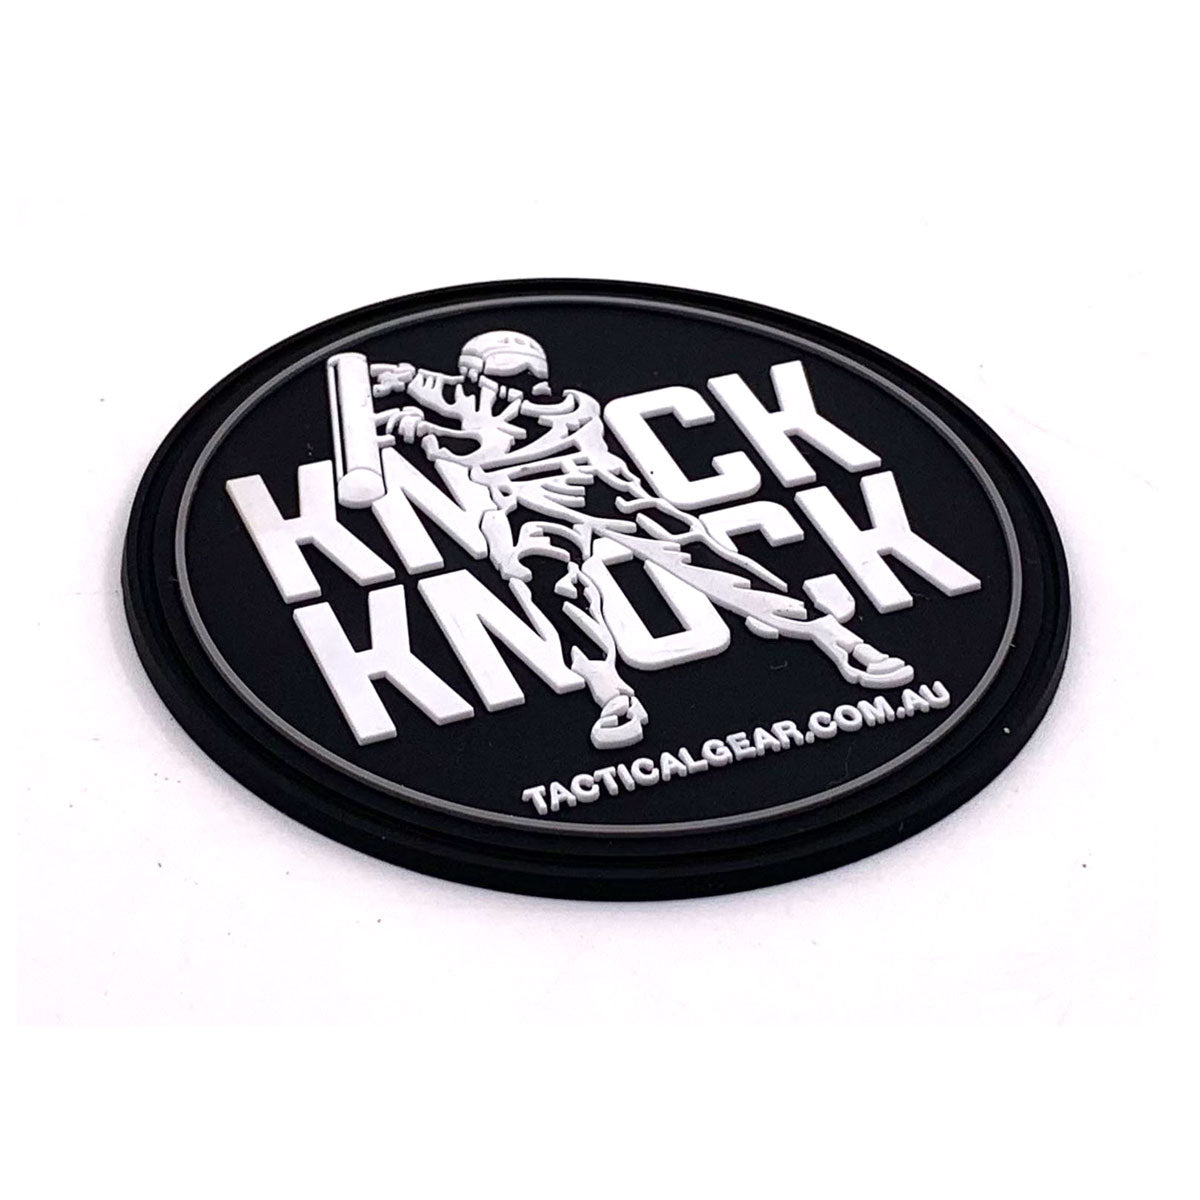 Tactical Gear Limited Edition Knock-Knock Patch Patches & Tags Tactical Gear Australia Tactical Gear Supplier Tactical Distributors Australia